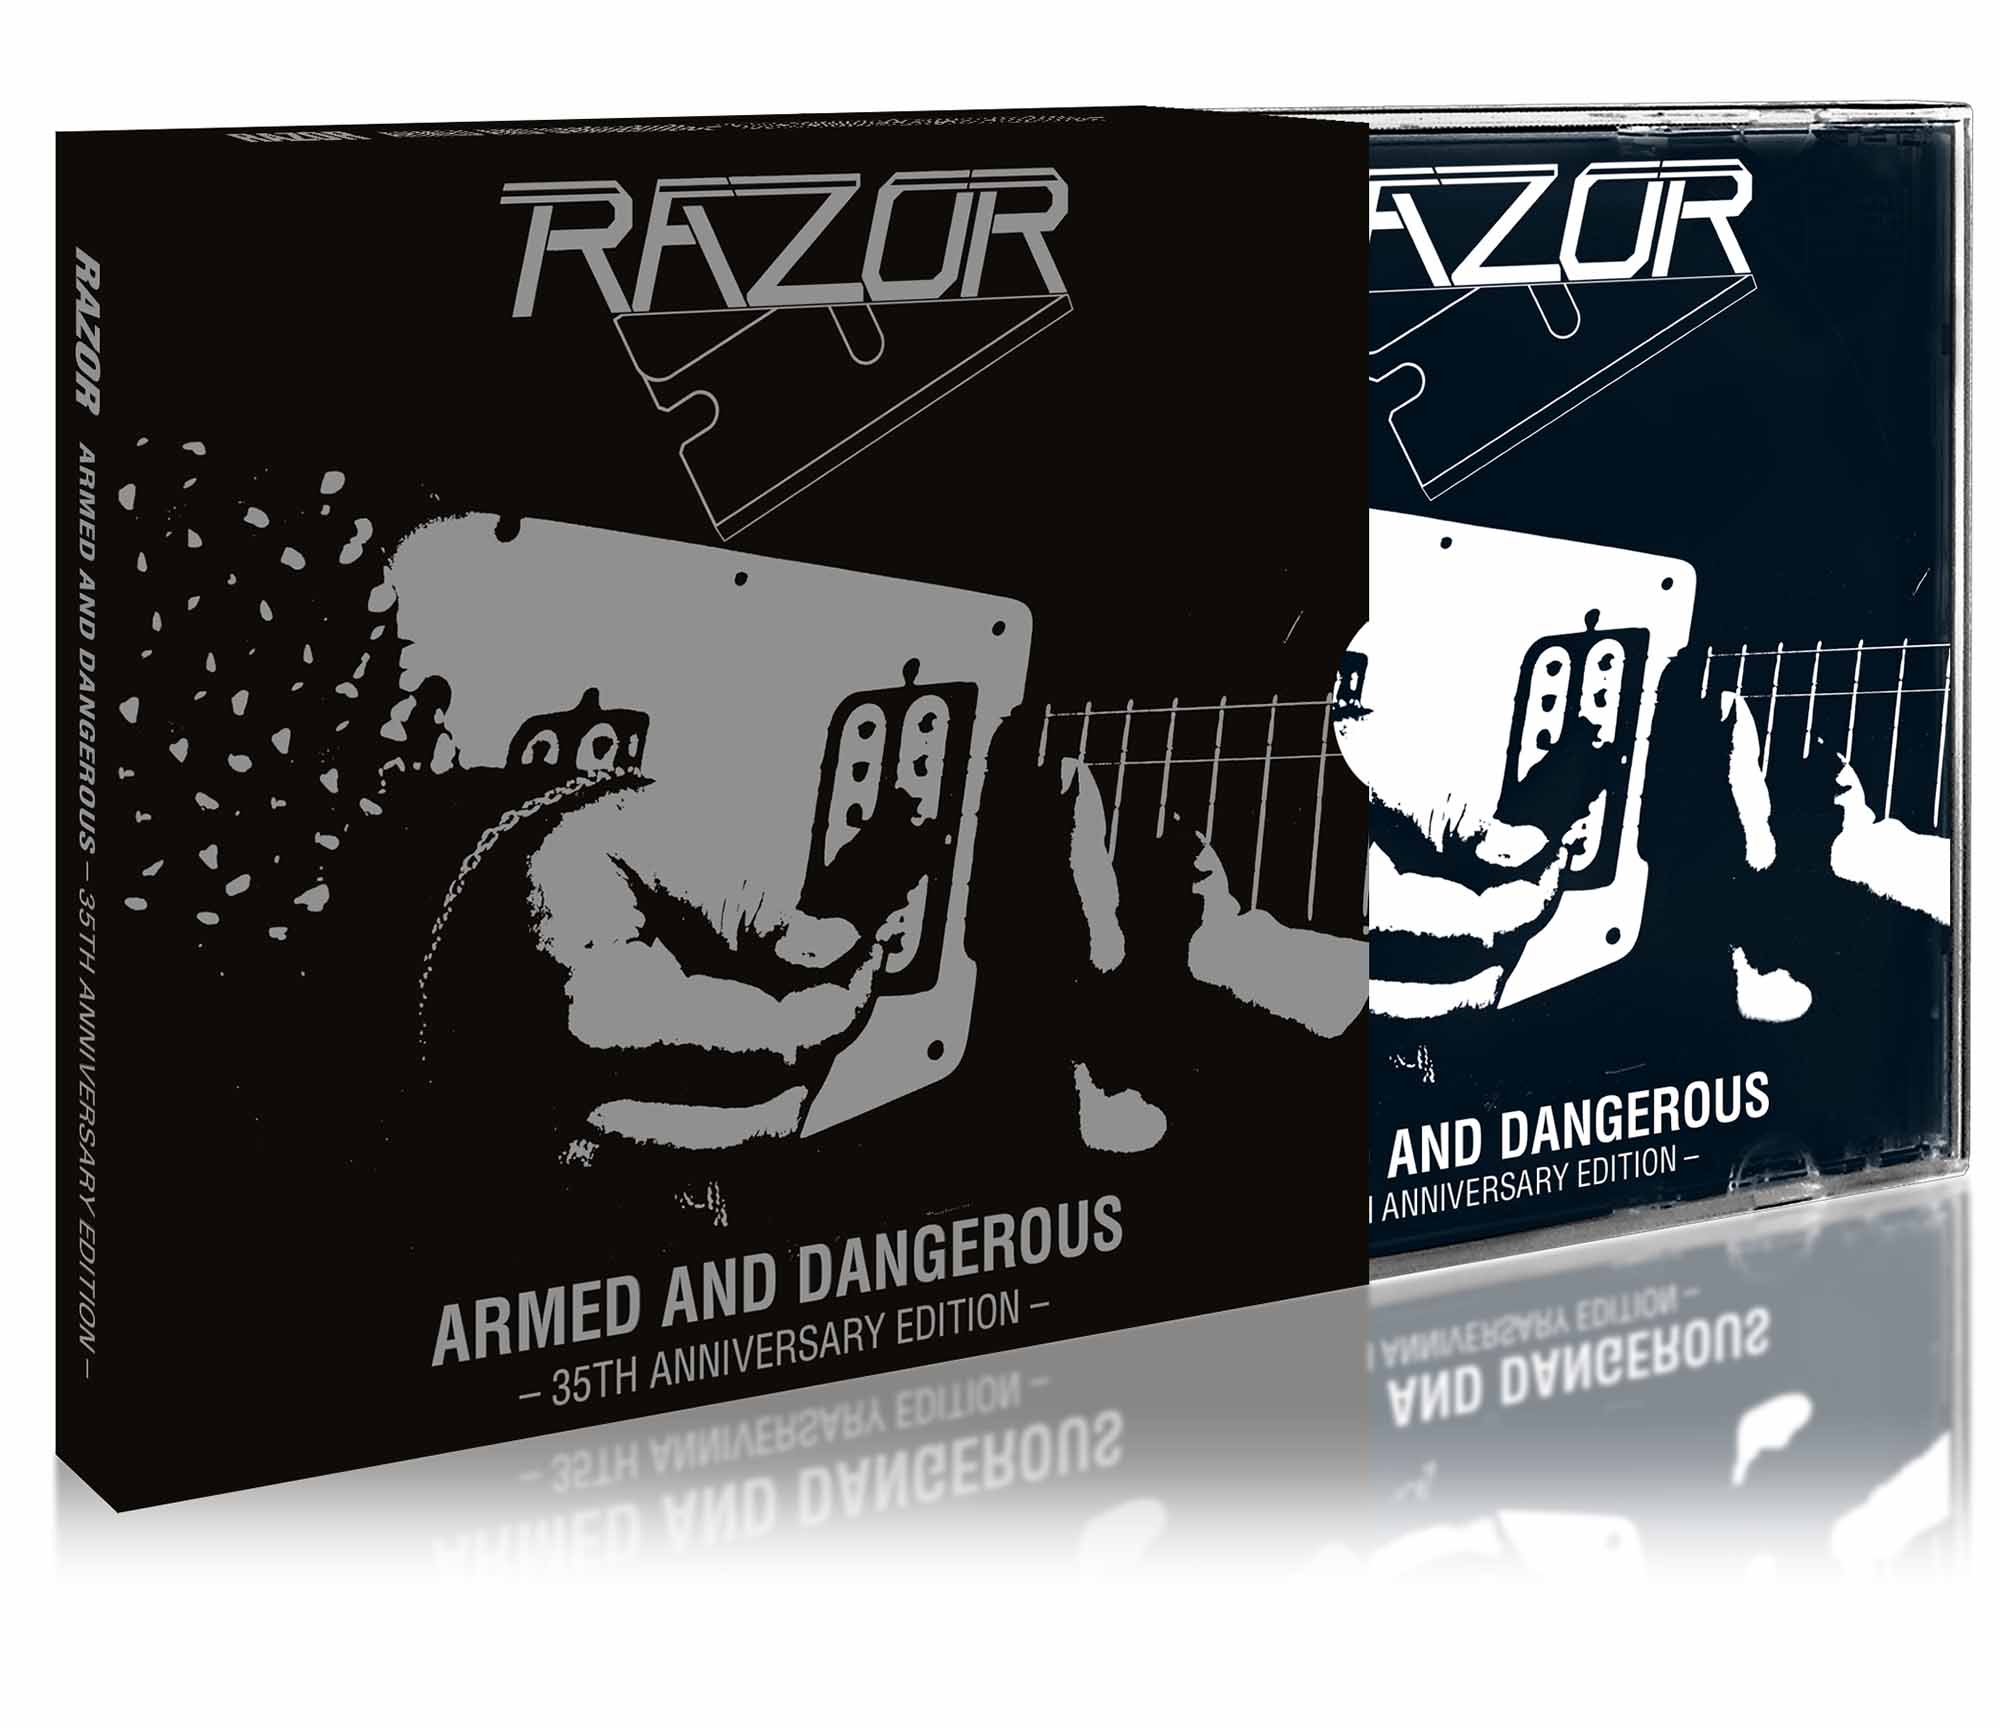 RAZOR - Armed and Dangerous - 35th Anniversary Edition  CD